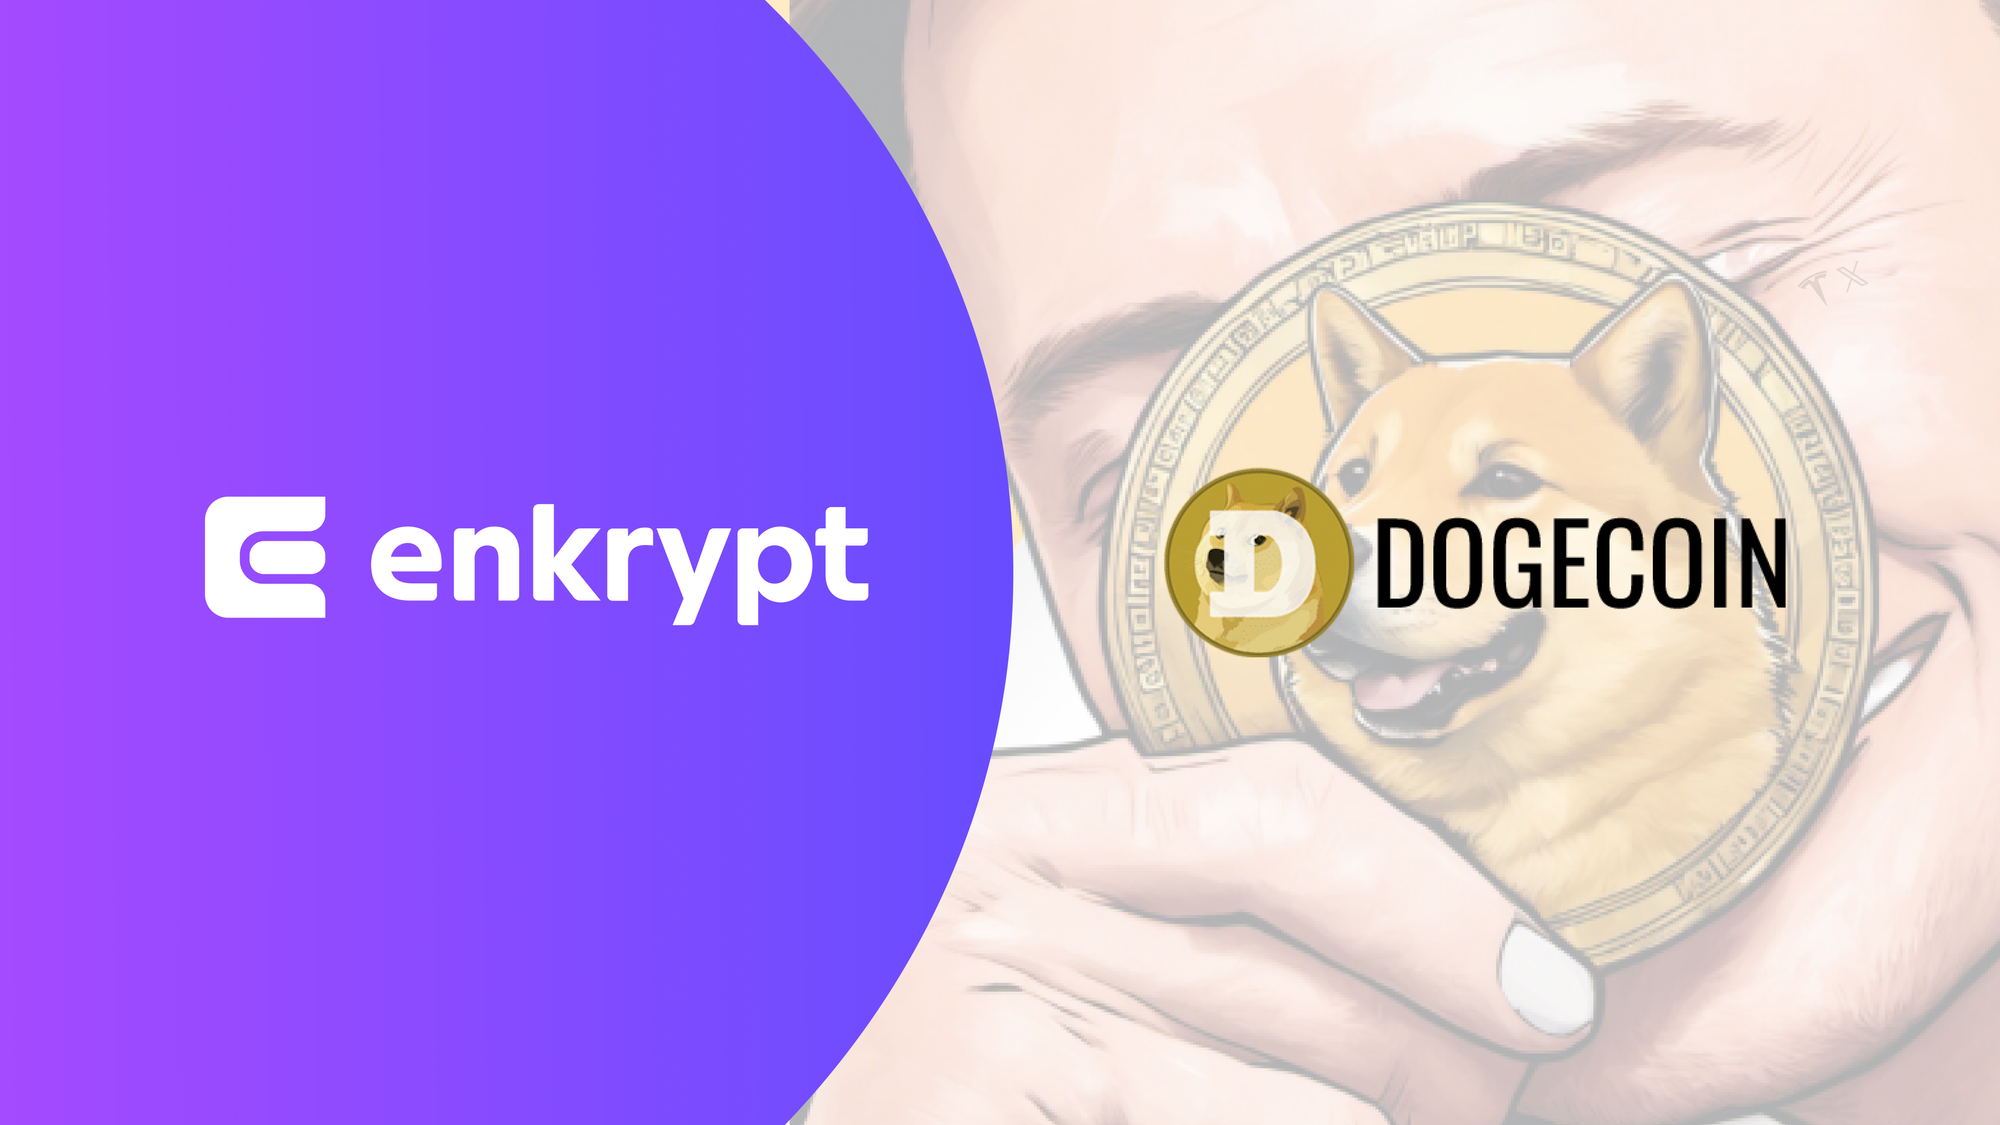 Interact with Dogecoin using Enkrypt